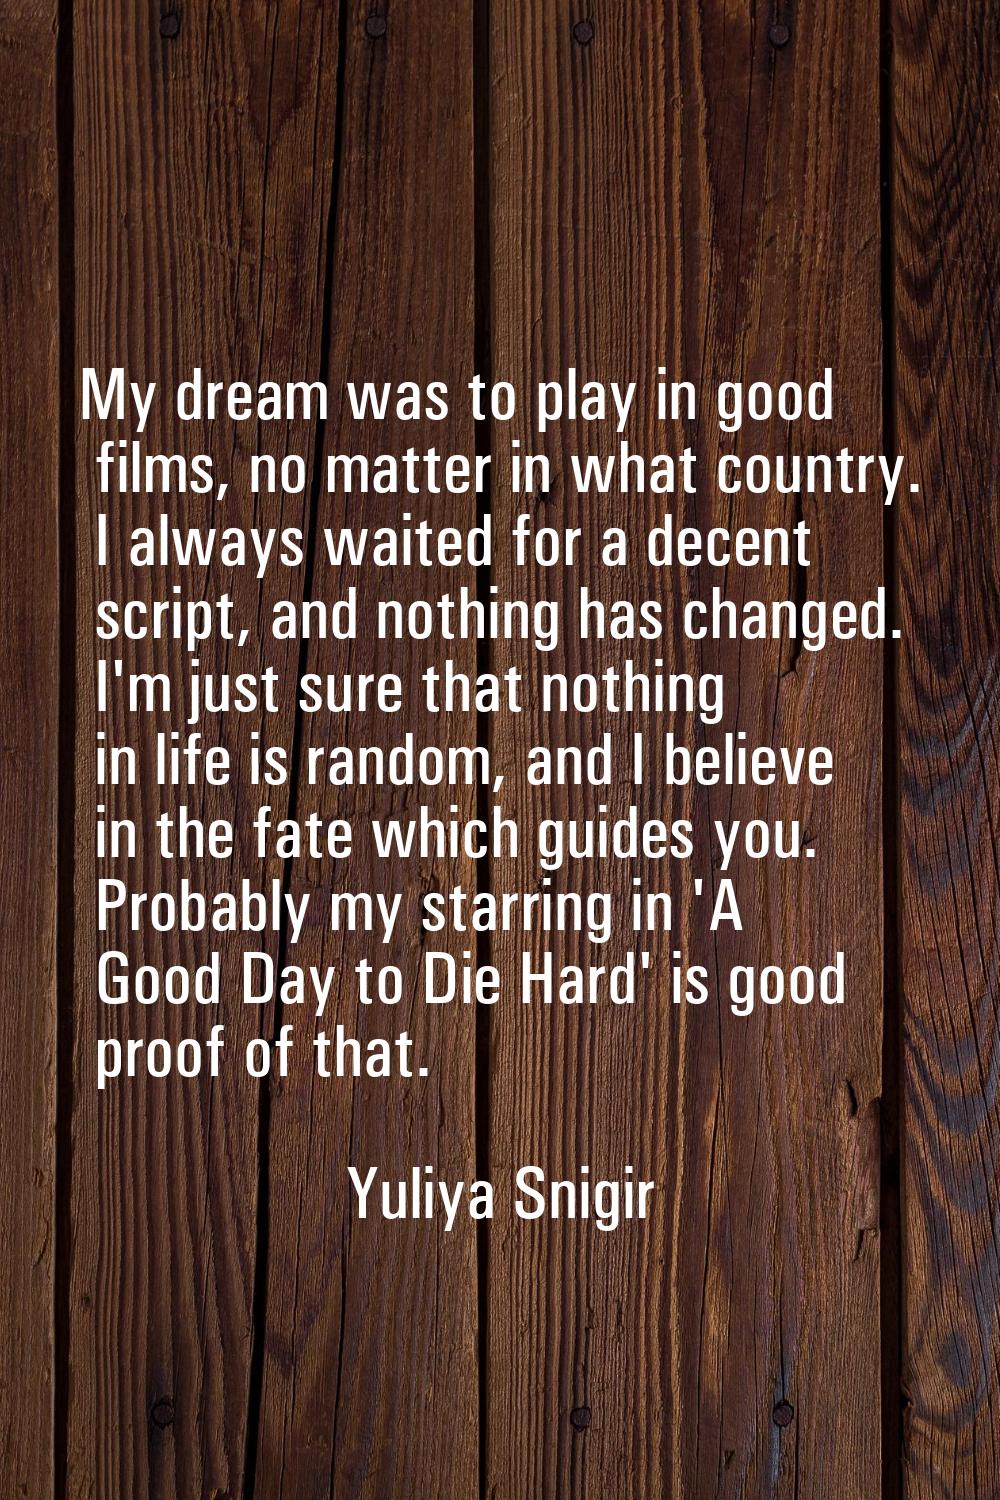 My dream was to play in good films, no matter in what country. I always waited for a decent script,